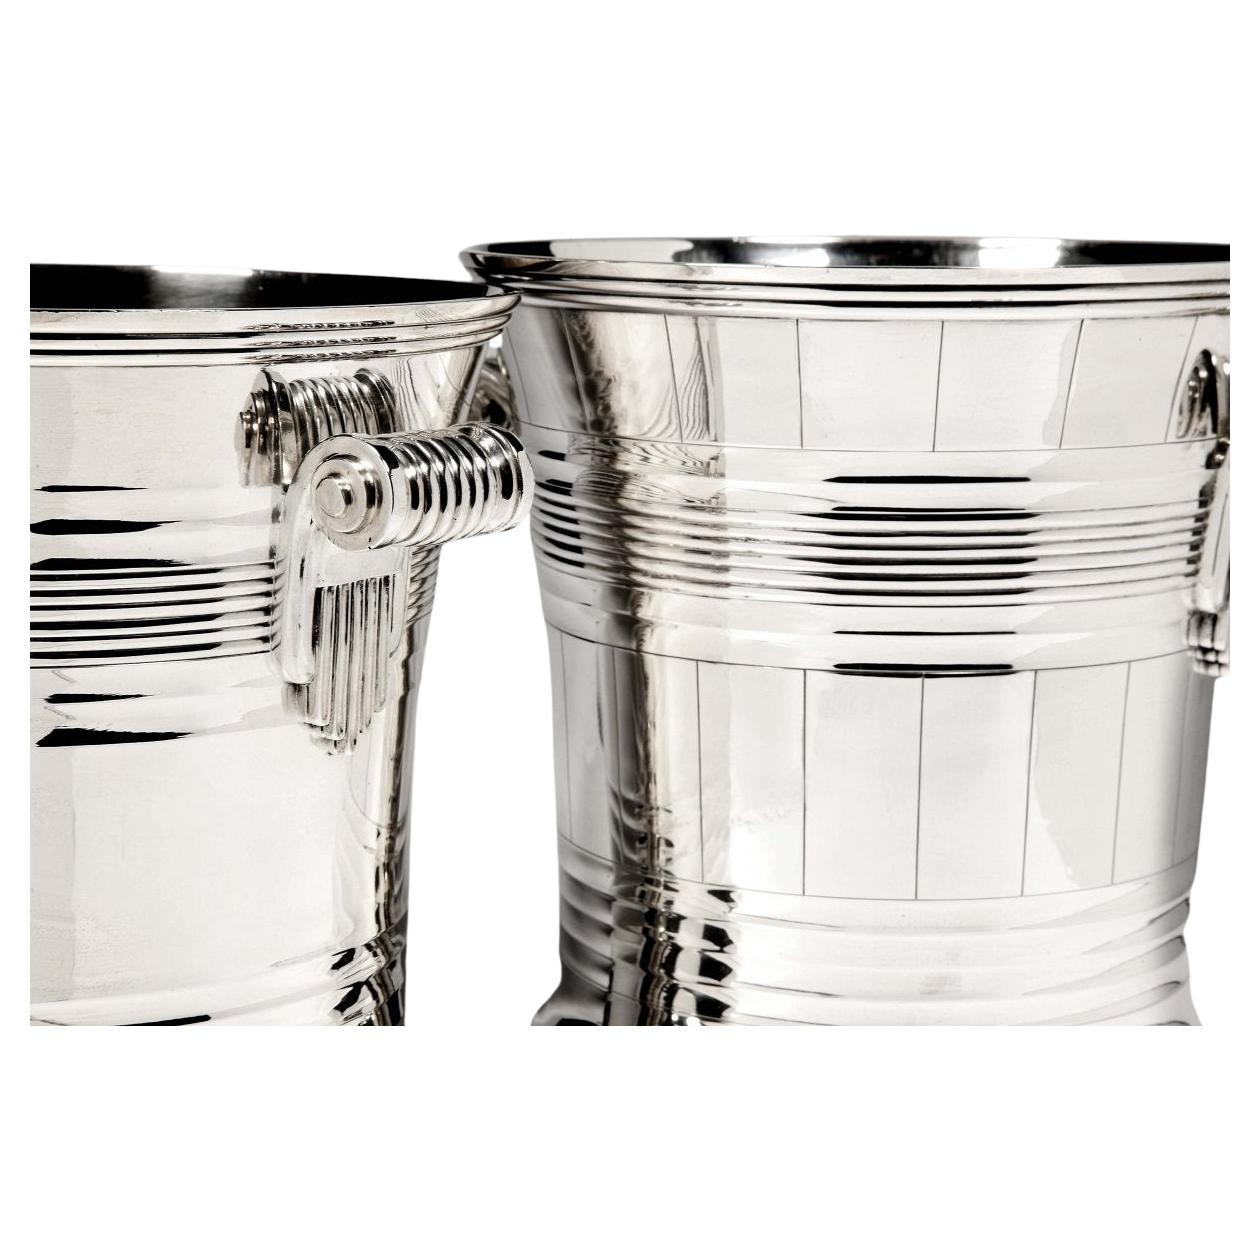 Goldsmith Boin Taburet - Pair Of Coolers In Solid Silver Art Deco Period For Sale